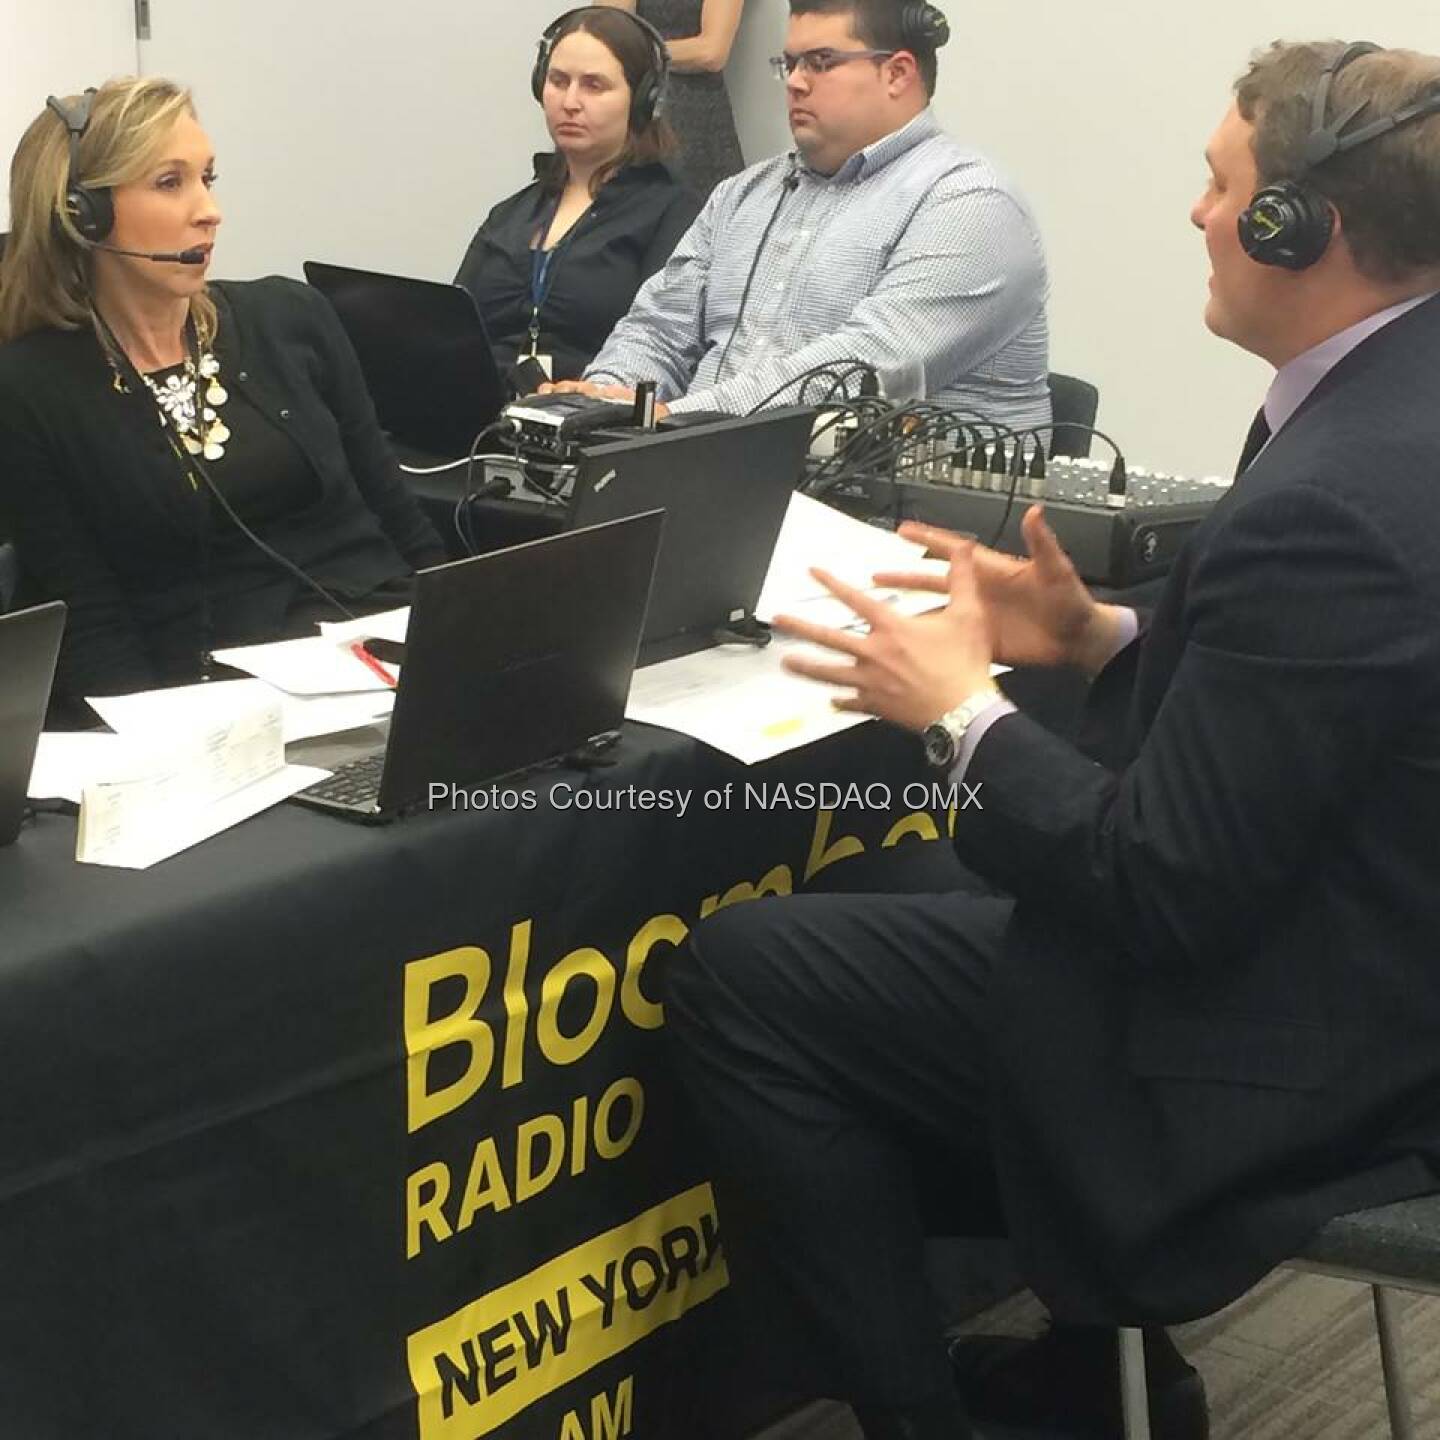 Bloomberg Radio Trend in the industry has a lot to do with the Smart Beta index; a lot of the advisors and investors are looking for that flexibility -Rob Hughes, VP, @NasdaqIndexes  Source: http://facebook.com/NASDAQ